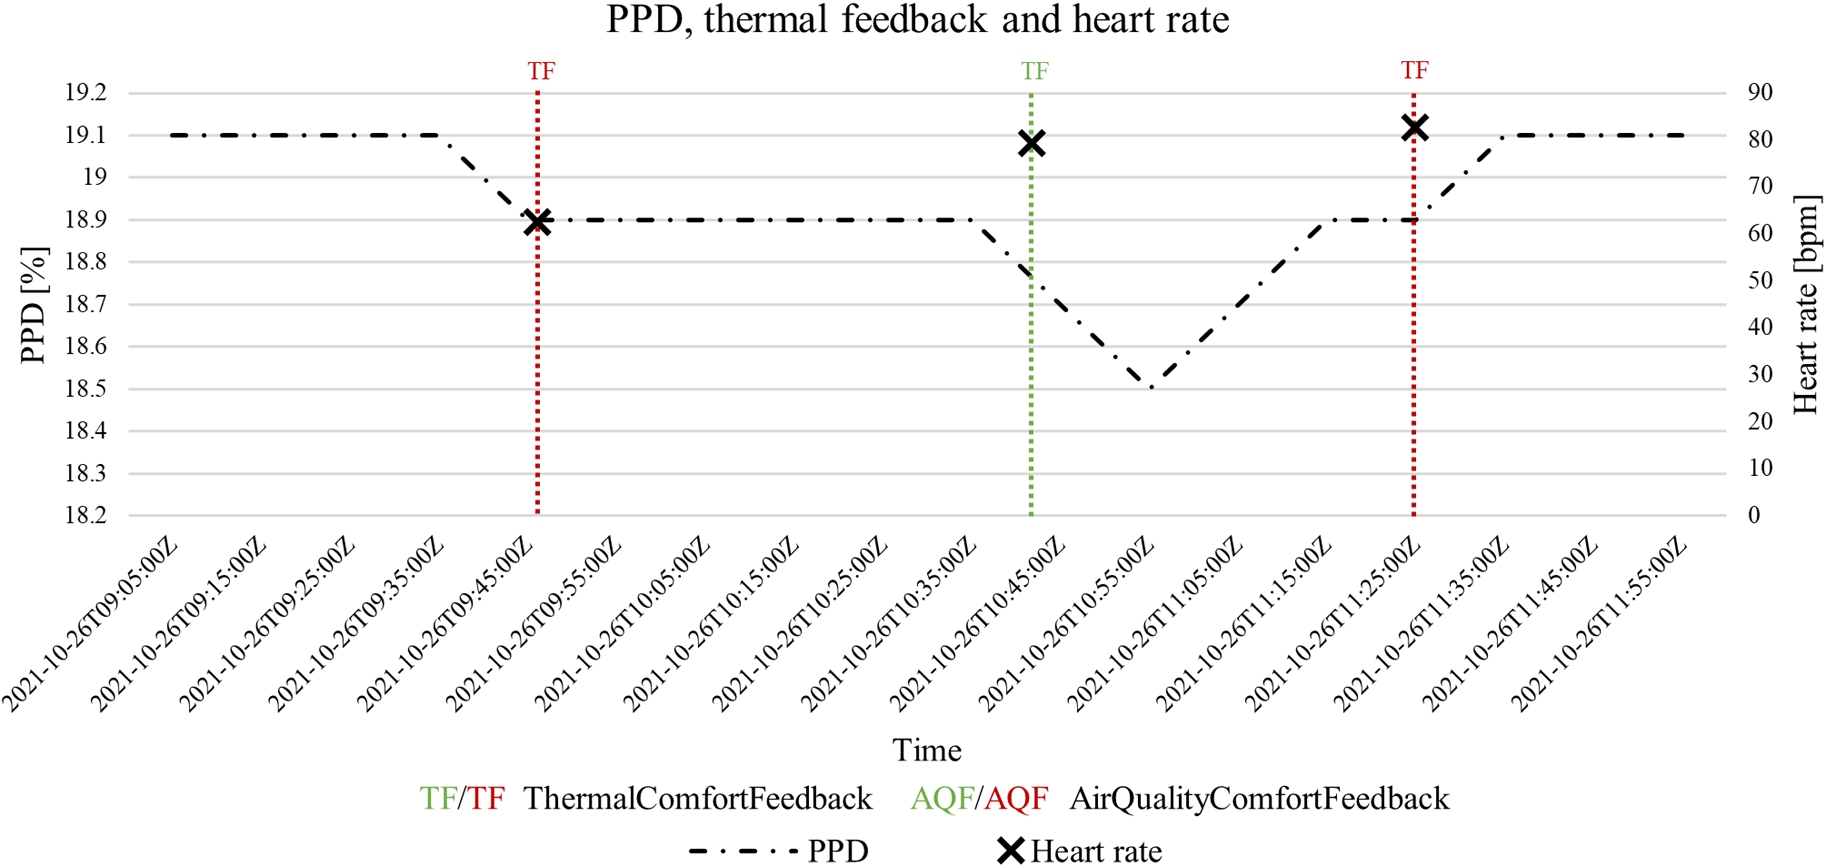 PPD in the :Kitchen and :JohnDoe’s thermal feedback and heart rate.